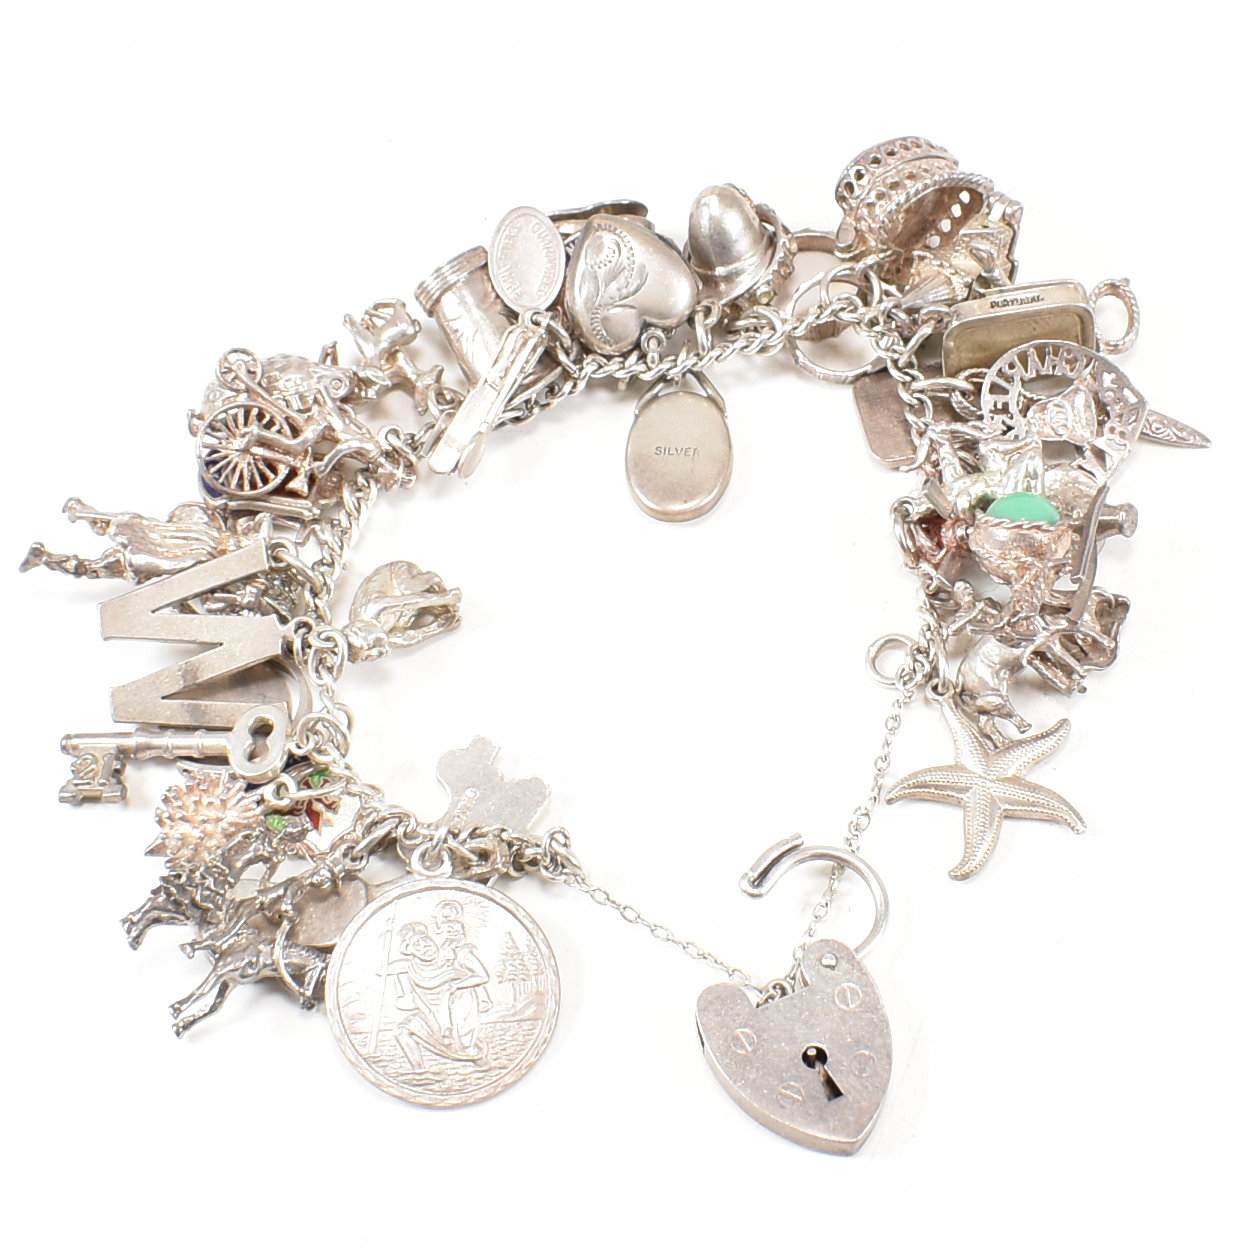 1970S HALLMARKED SILVER CHARM BRACELET WITH SILVER & WHITE METAL CHARMS - Image 4 of 4